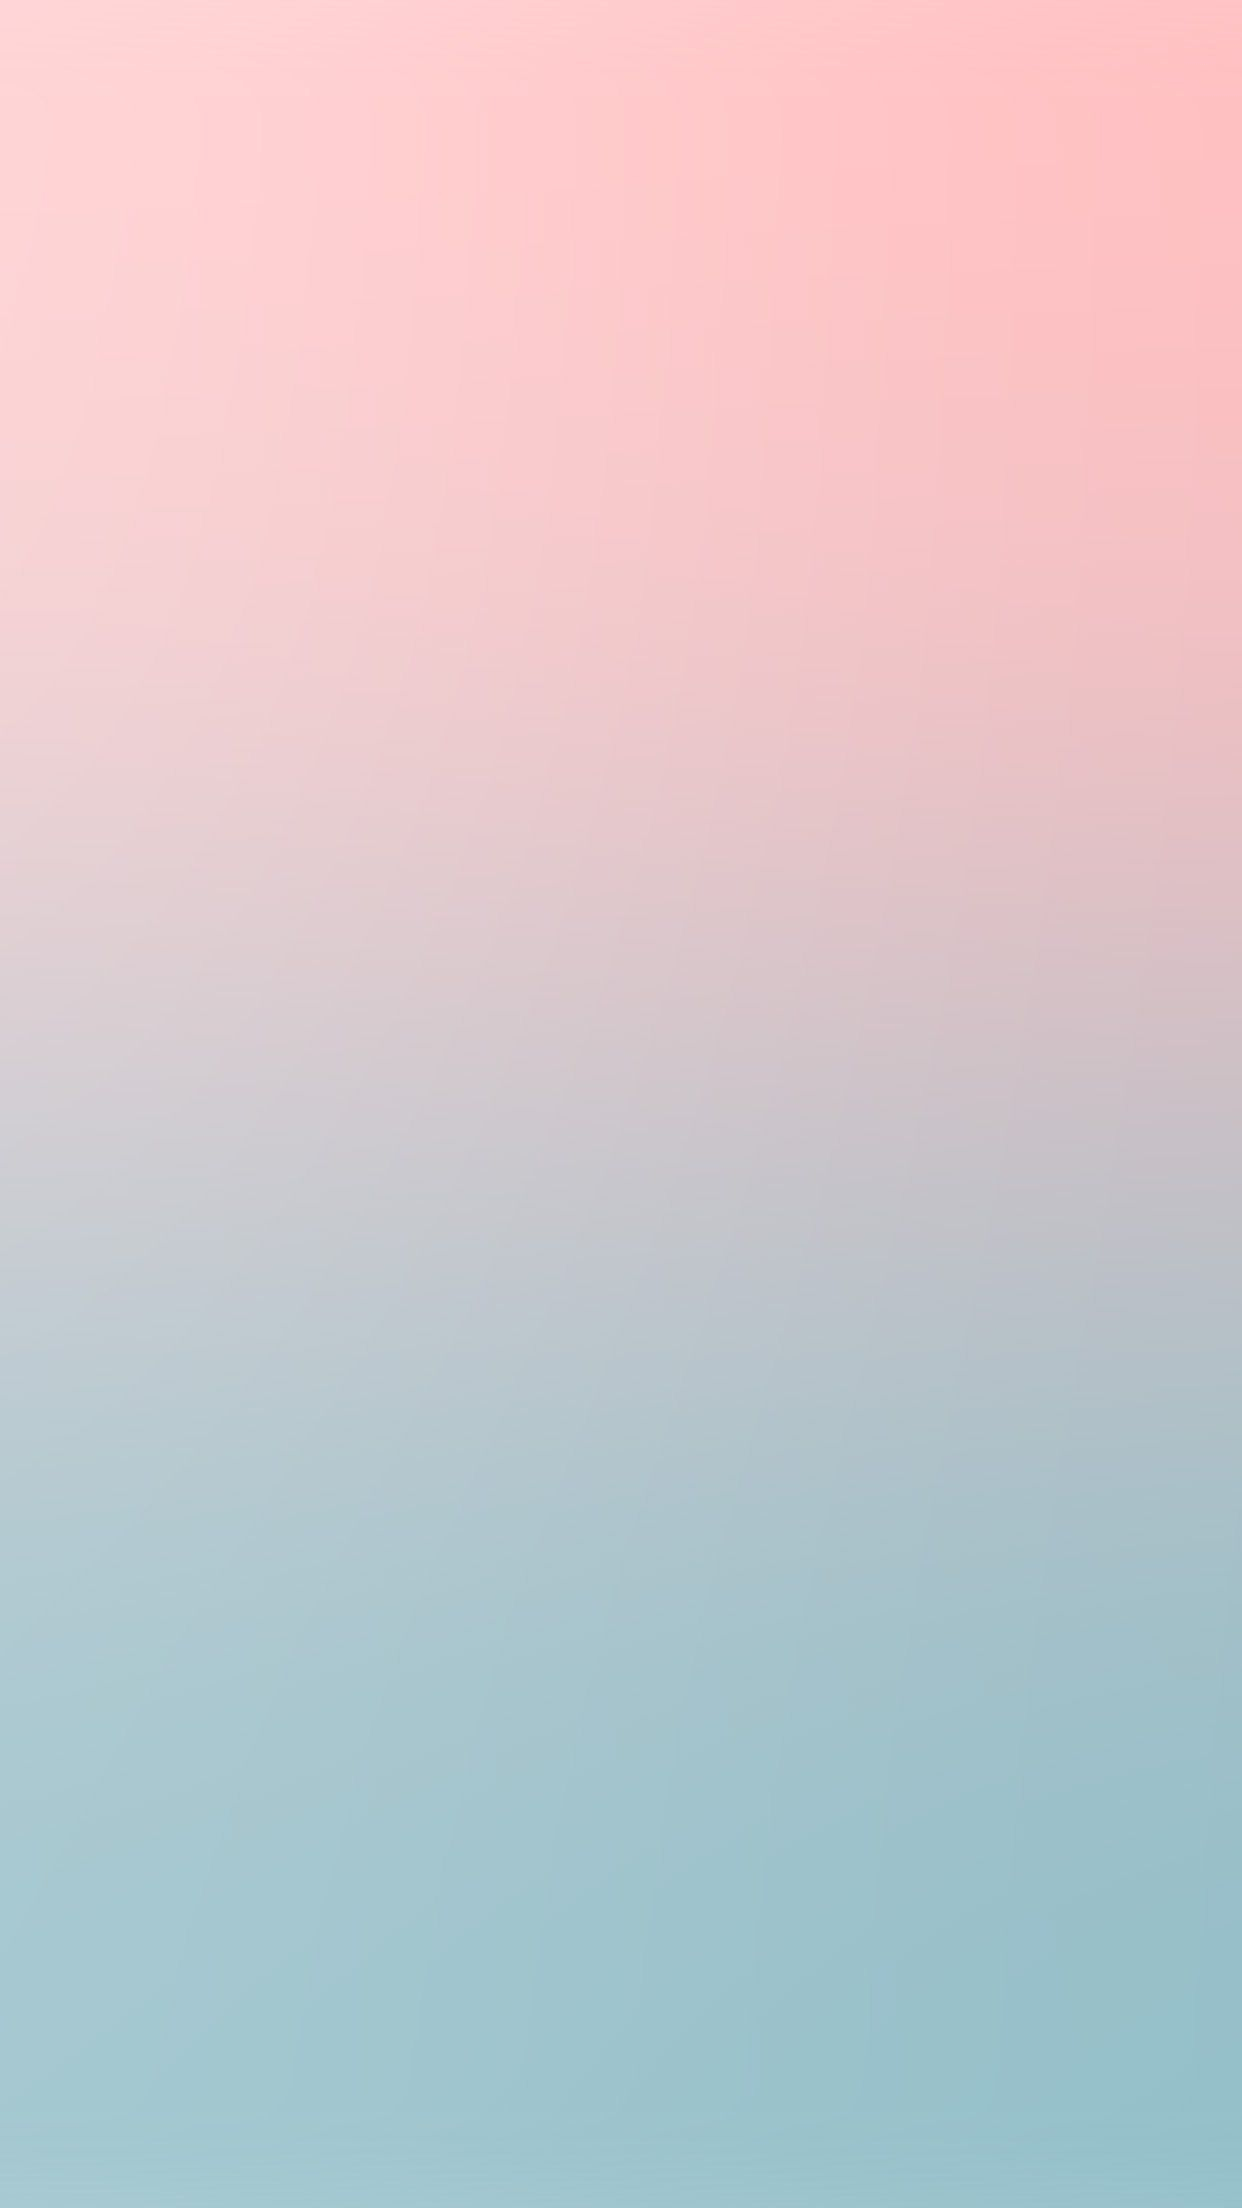 1242x2208 Pastel Pink and Blue Wallpapers Top Free Pastel Pink and Blue Backgrounds